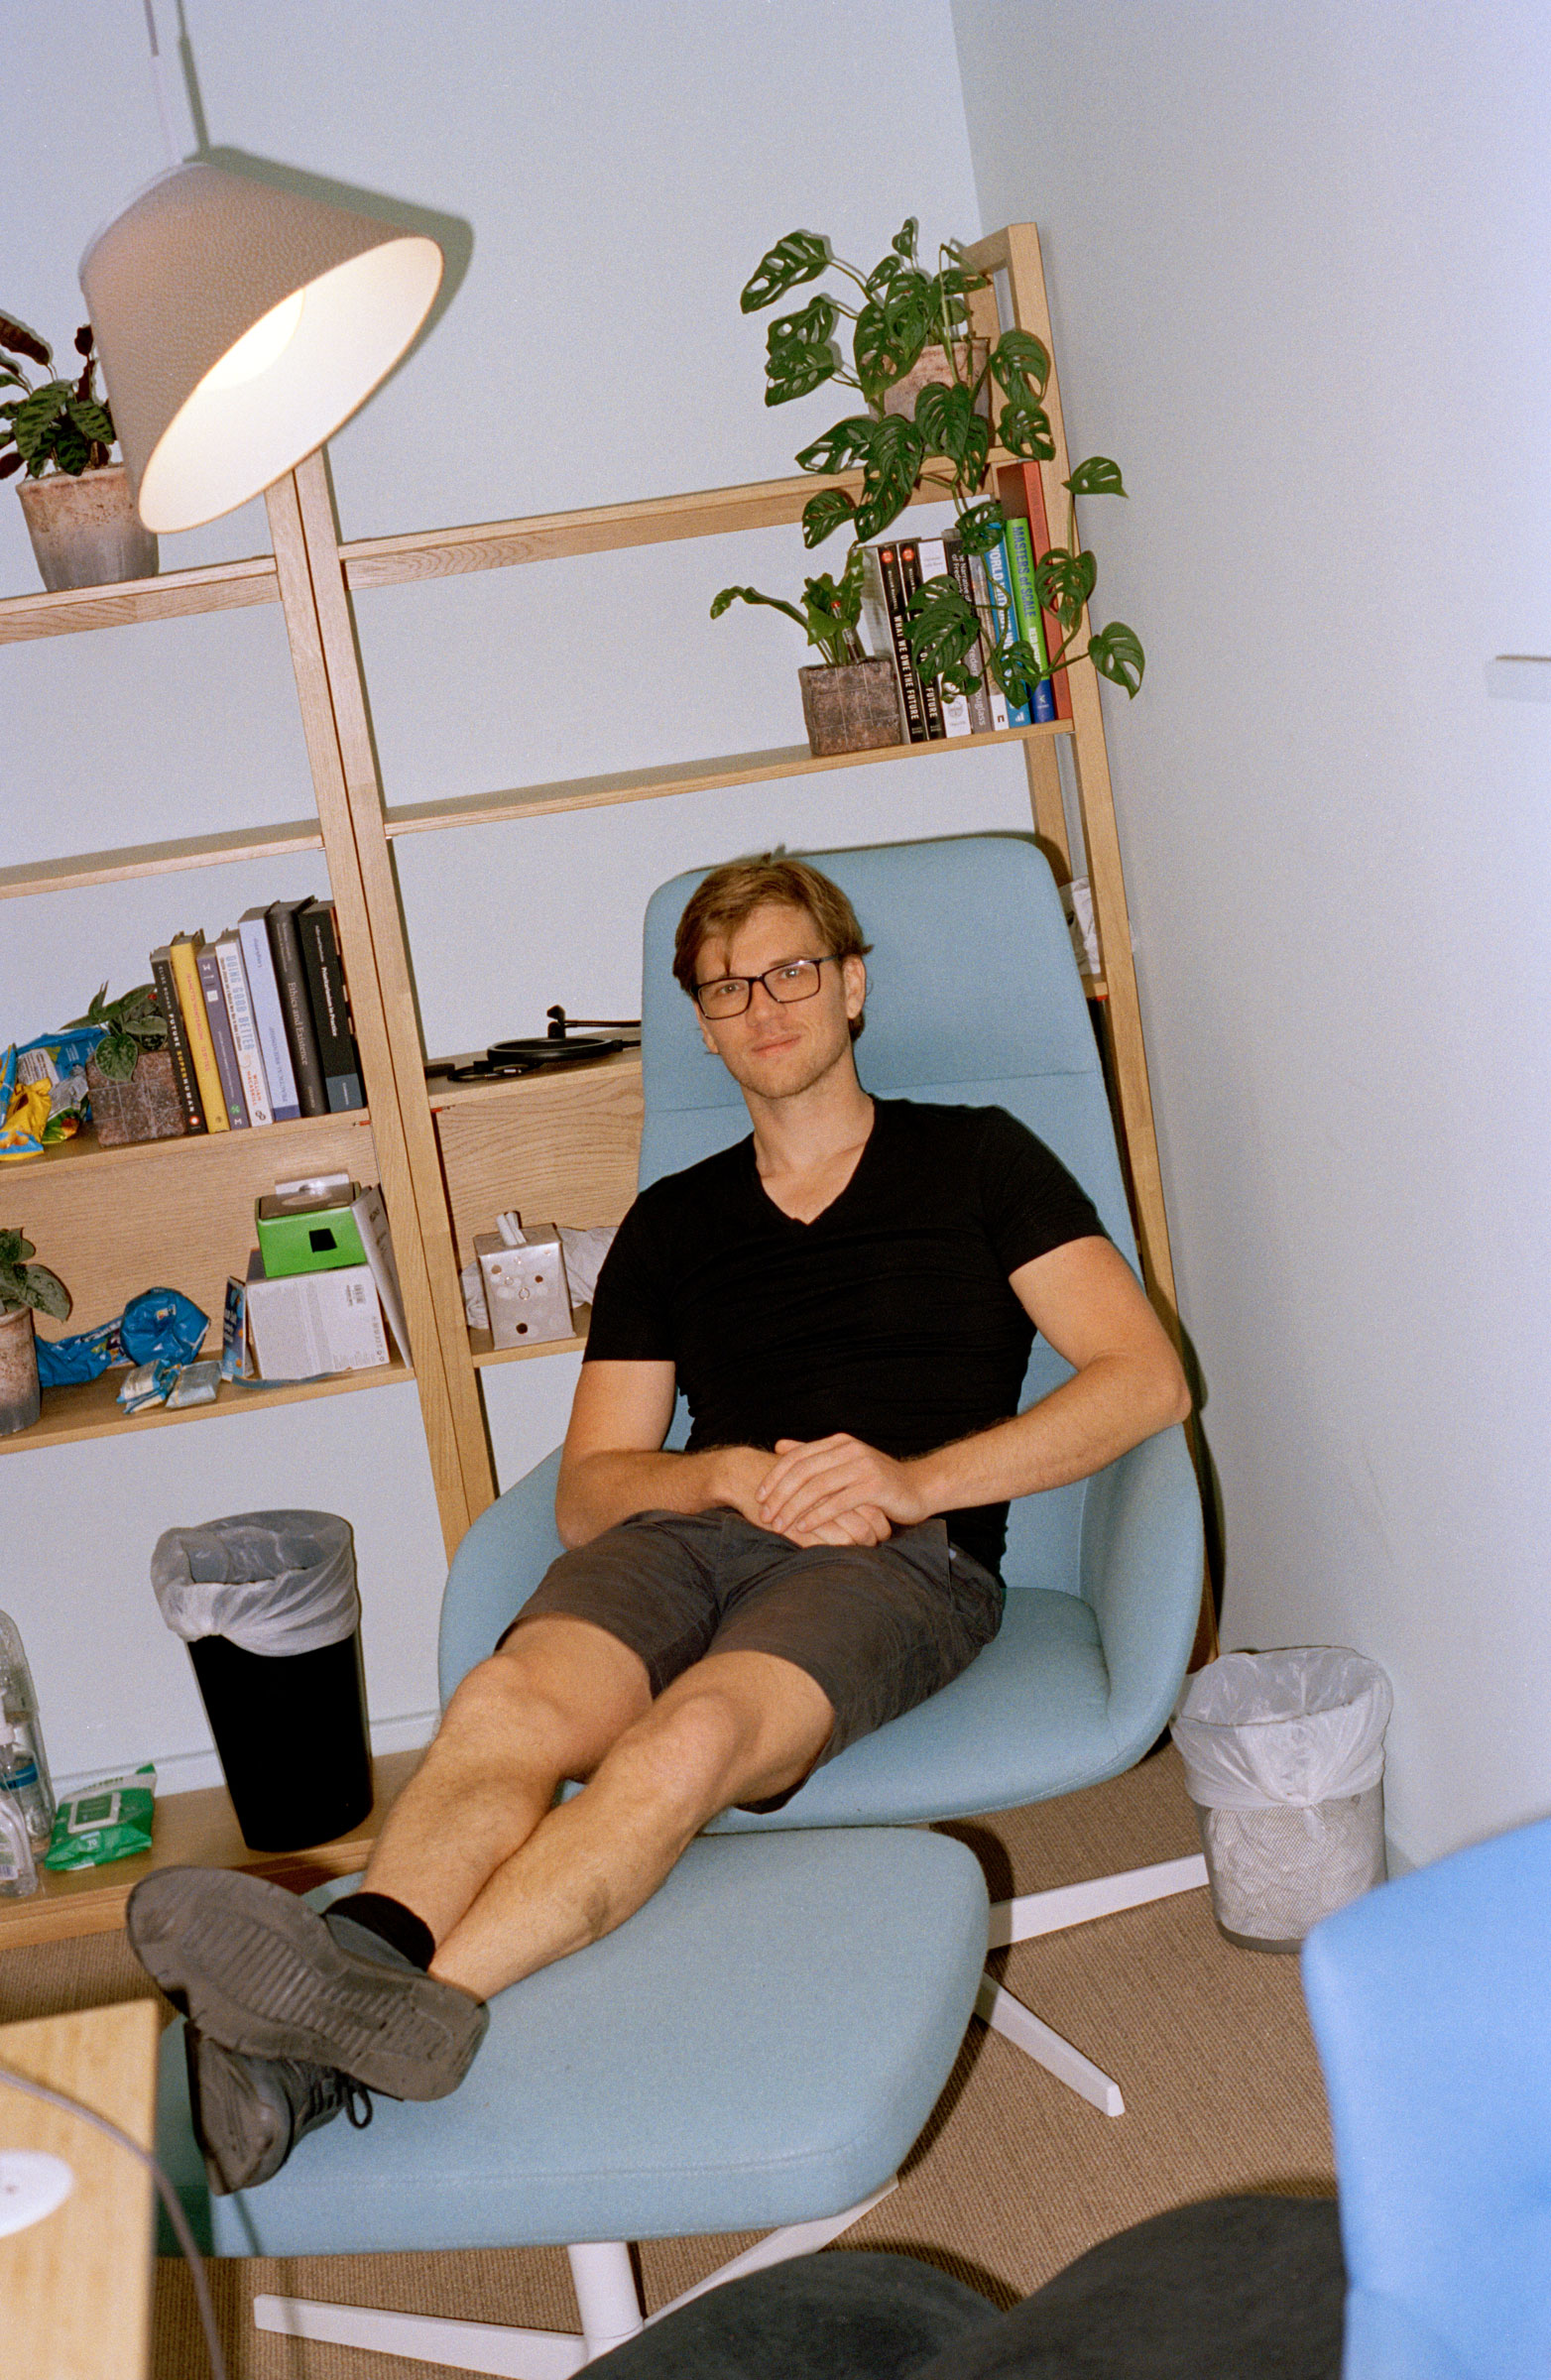 Associate philosophy professor William MacAskill, at his office in Oxford on July 14 (Sophie Green for TIME)